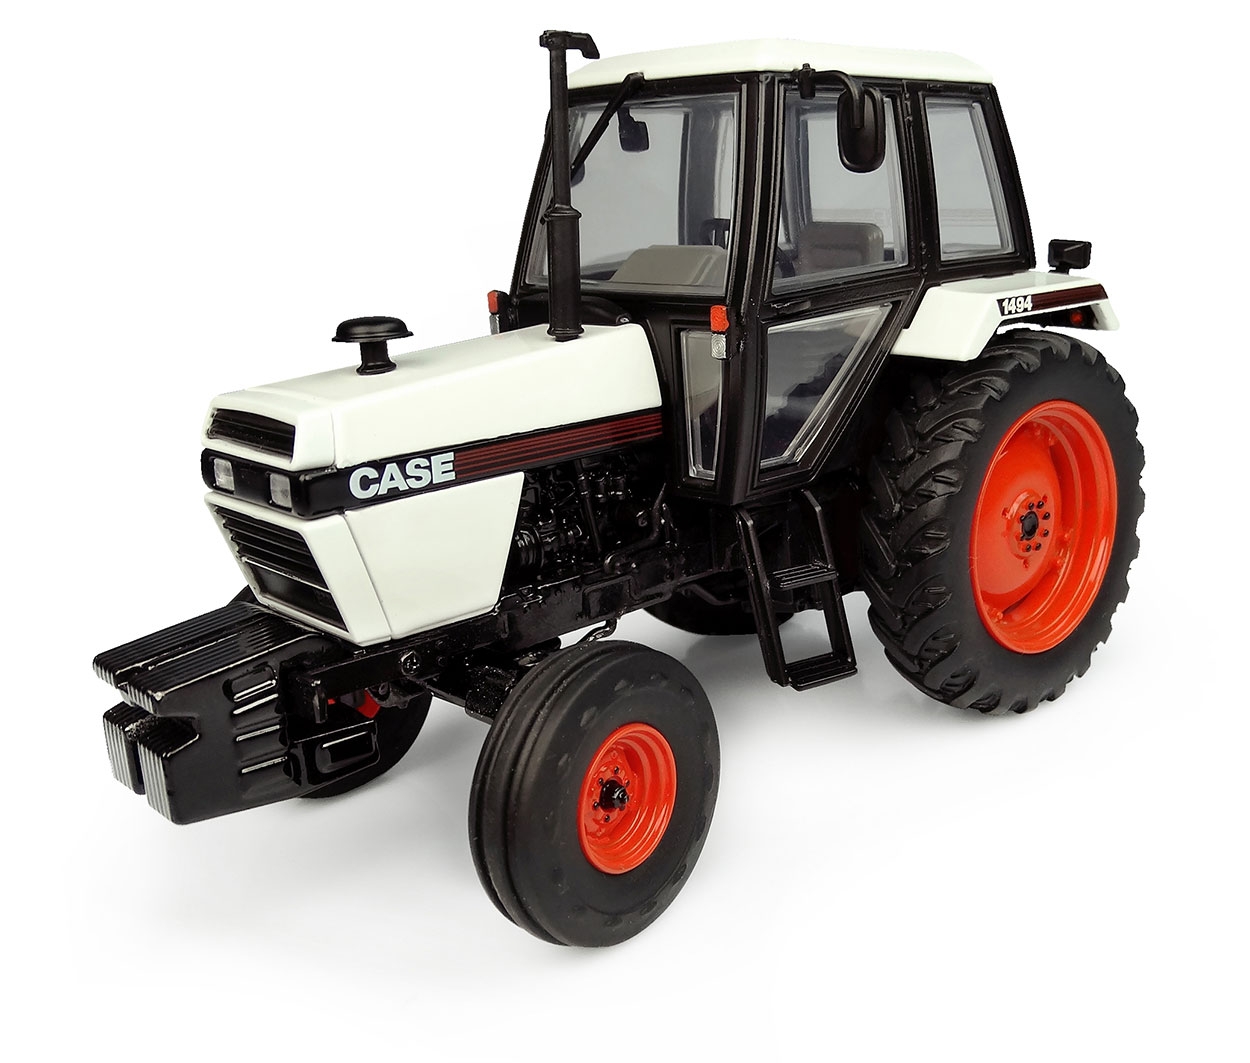 Case 1494 2WD Tractor White 1/32 Diecast Model by Universal Hobbies